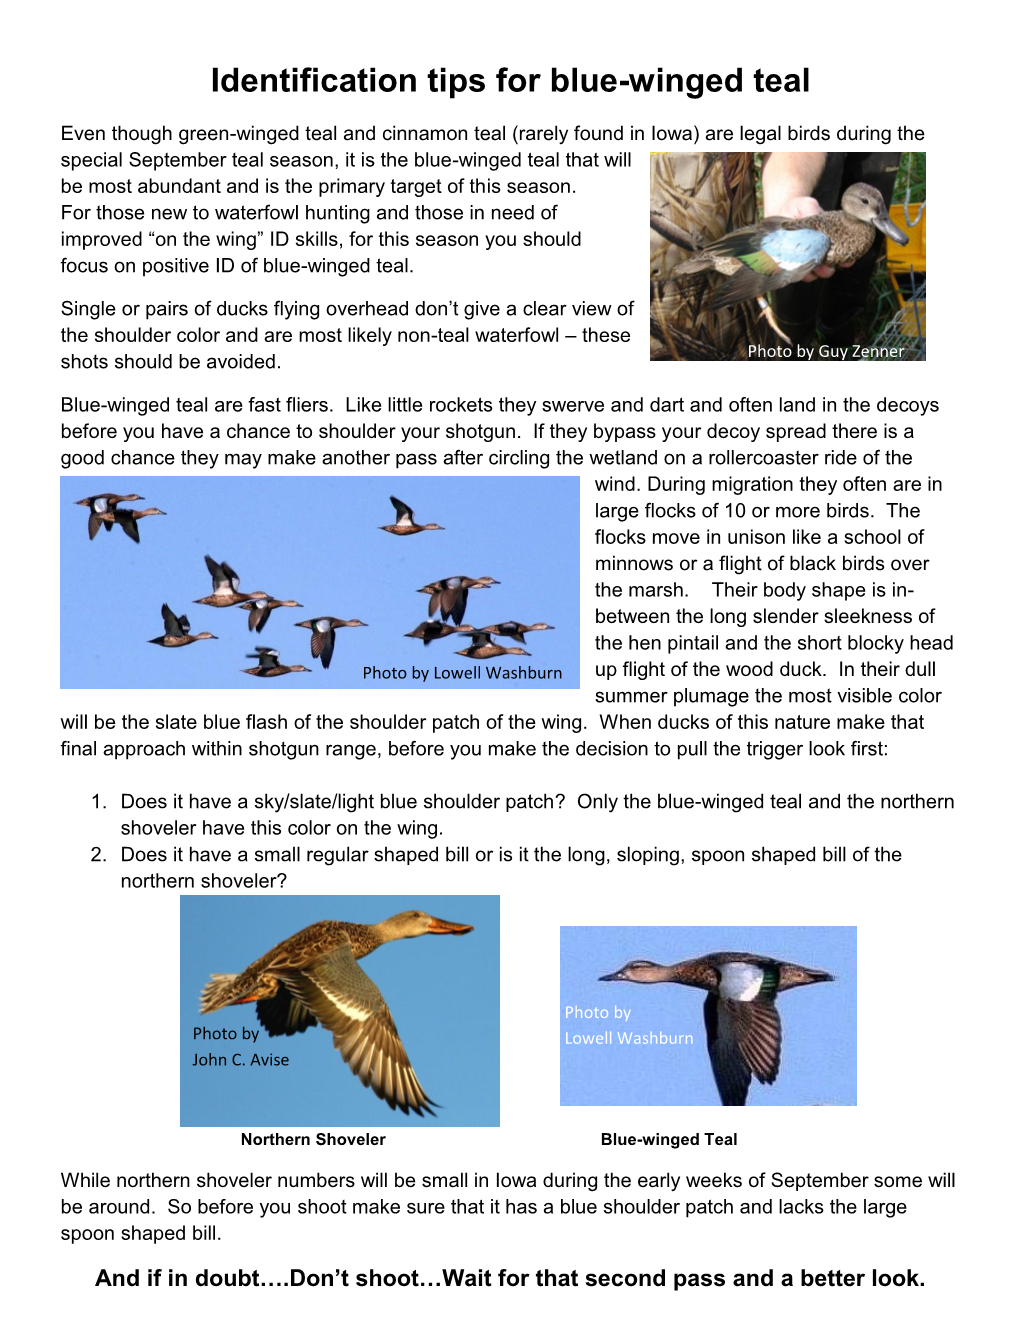 Identification Tips for Blue-Winged Teal